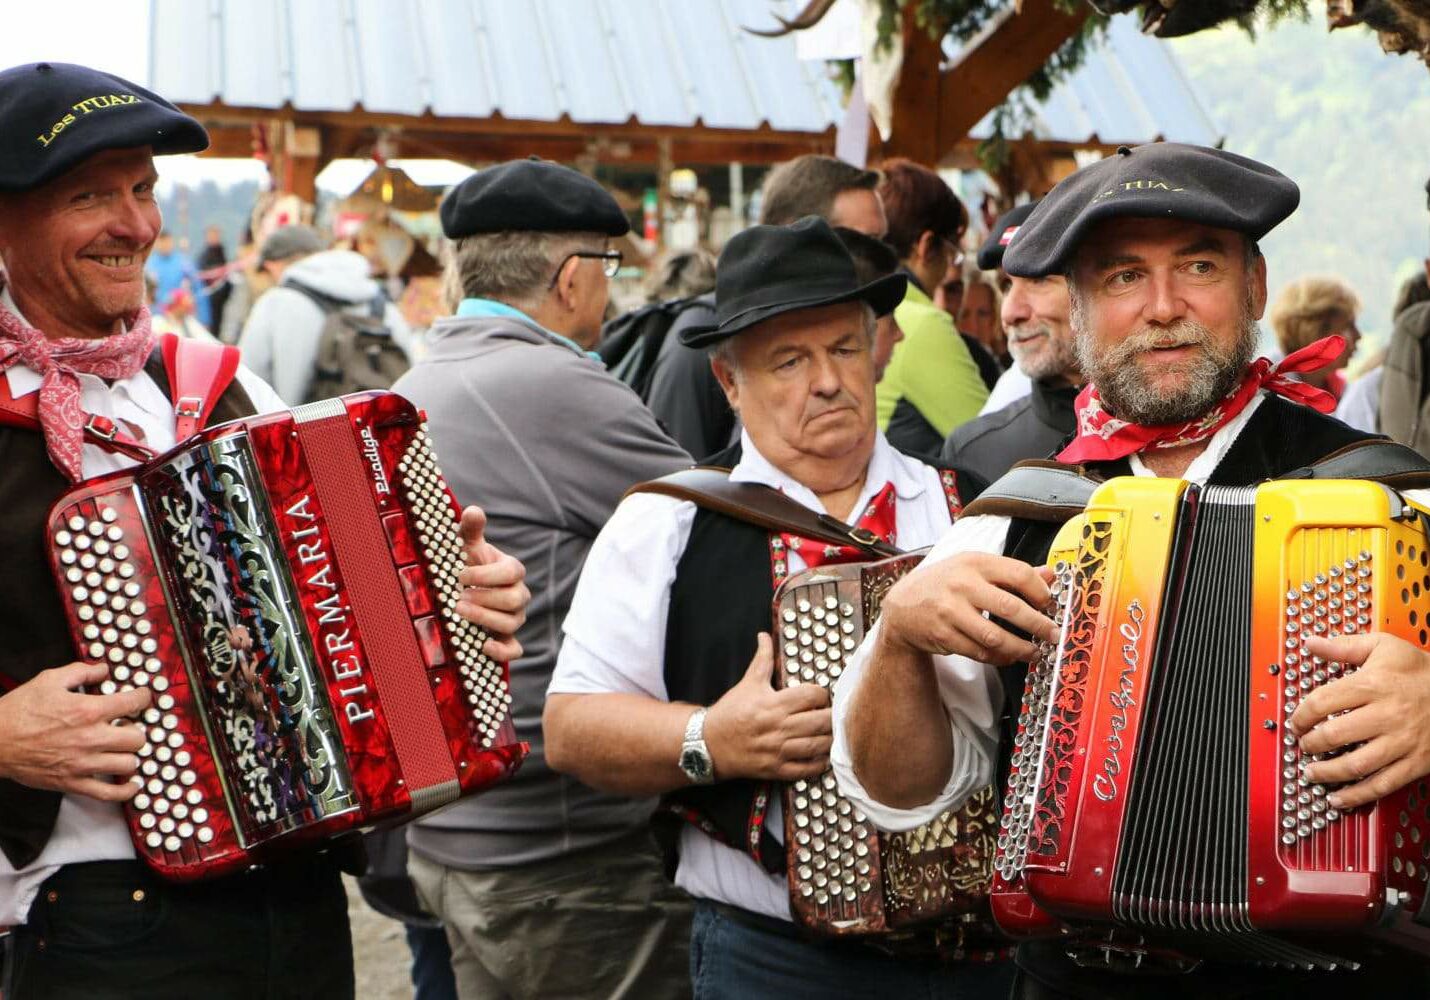 Accordion players in France at Belle Dimanche